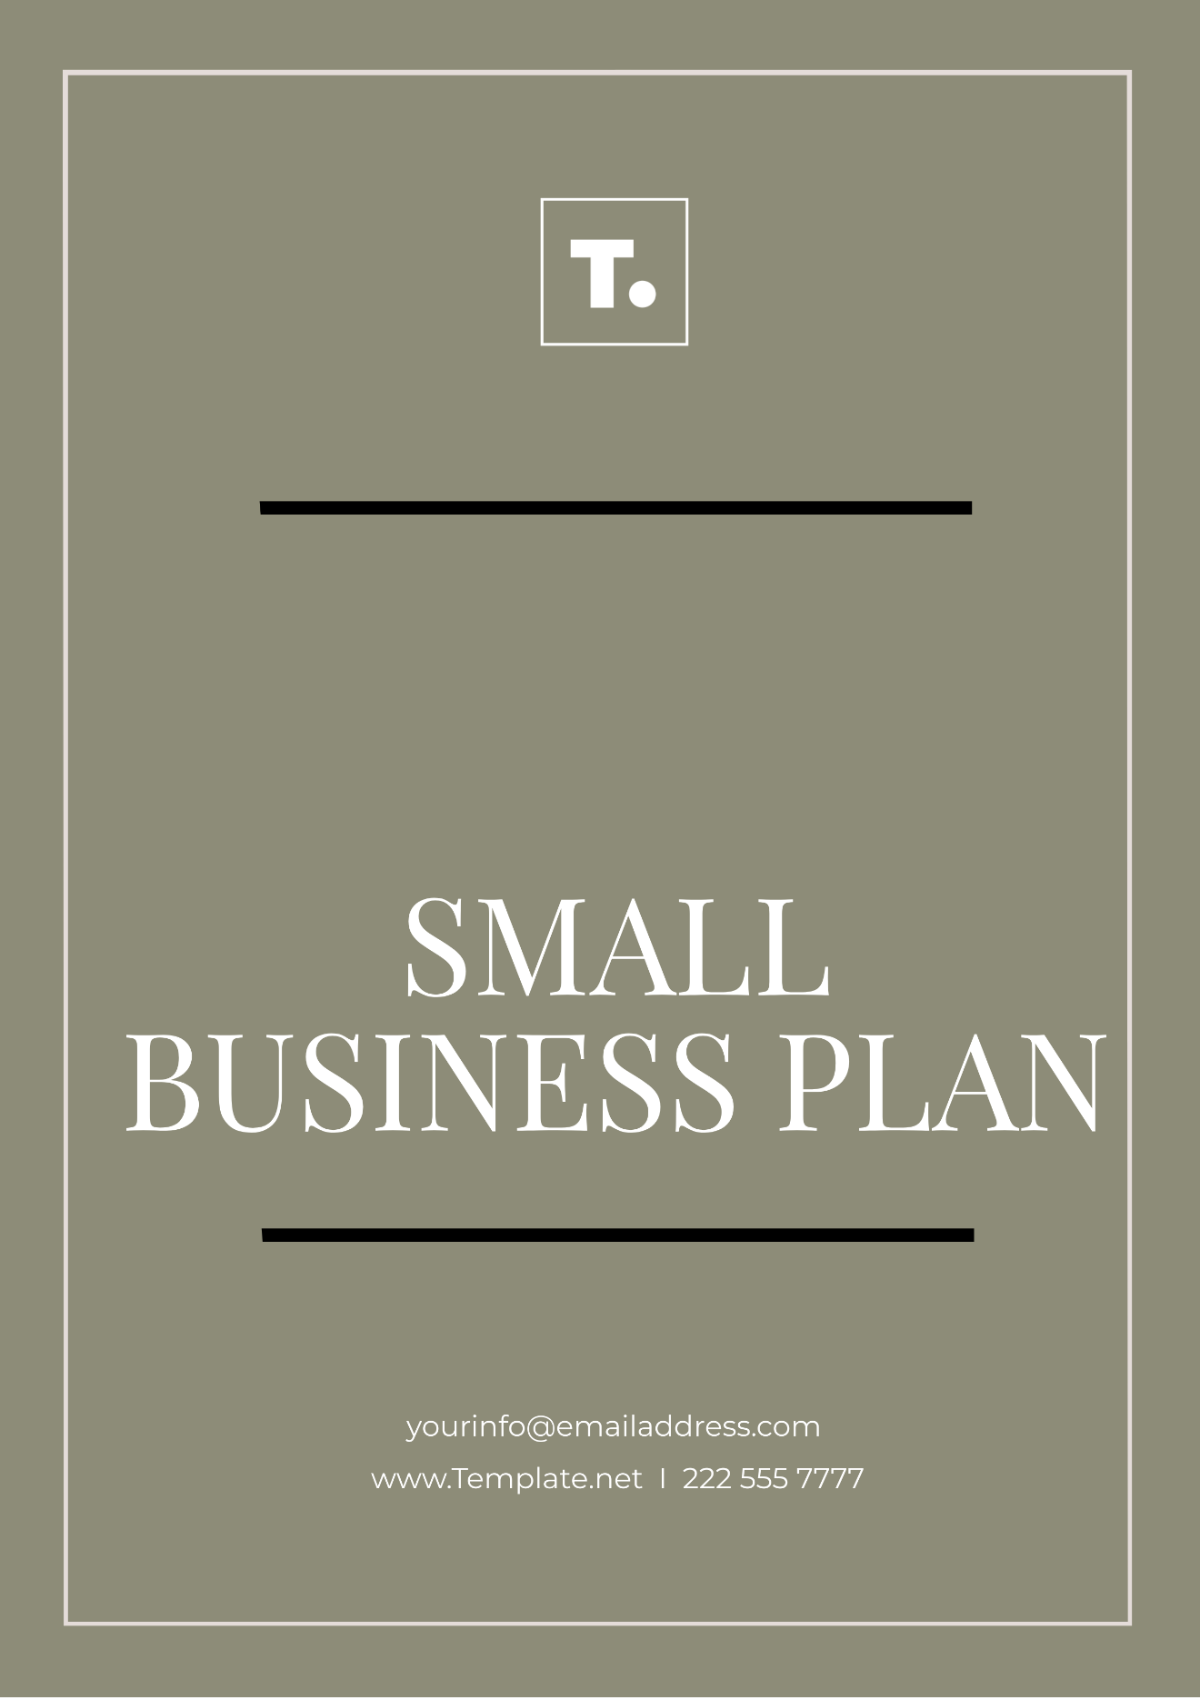 Small Business Plan Template